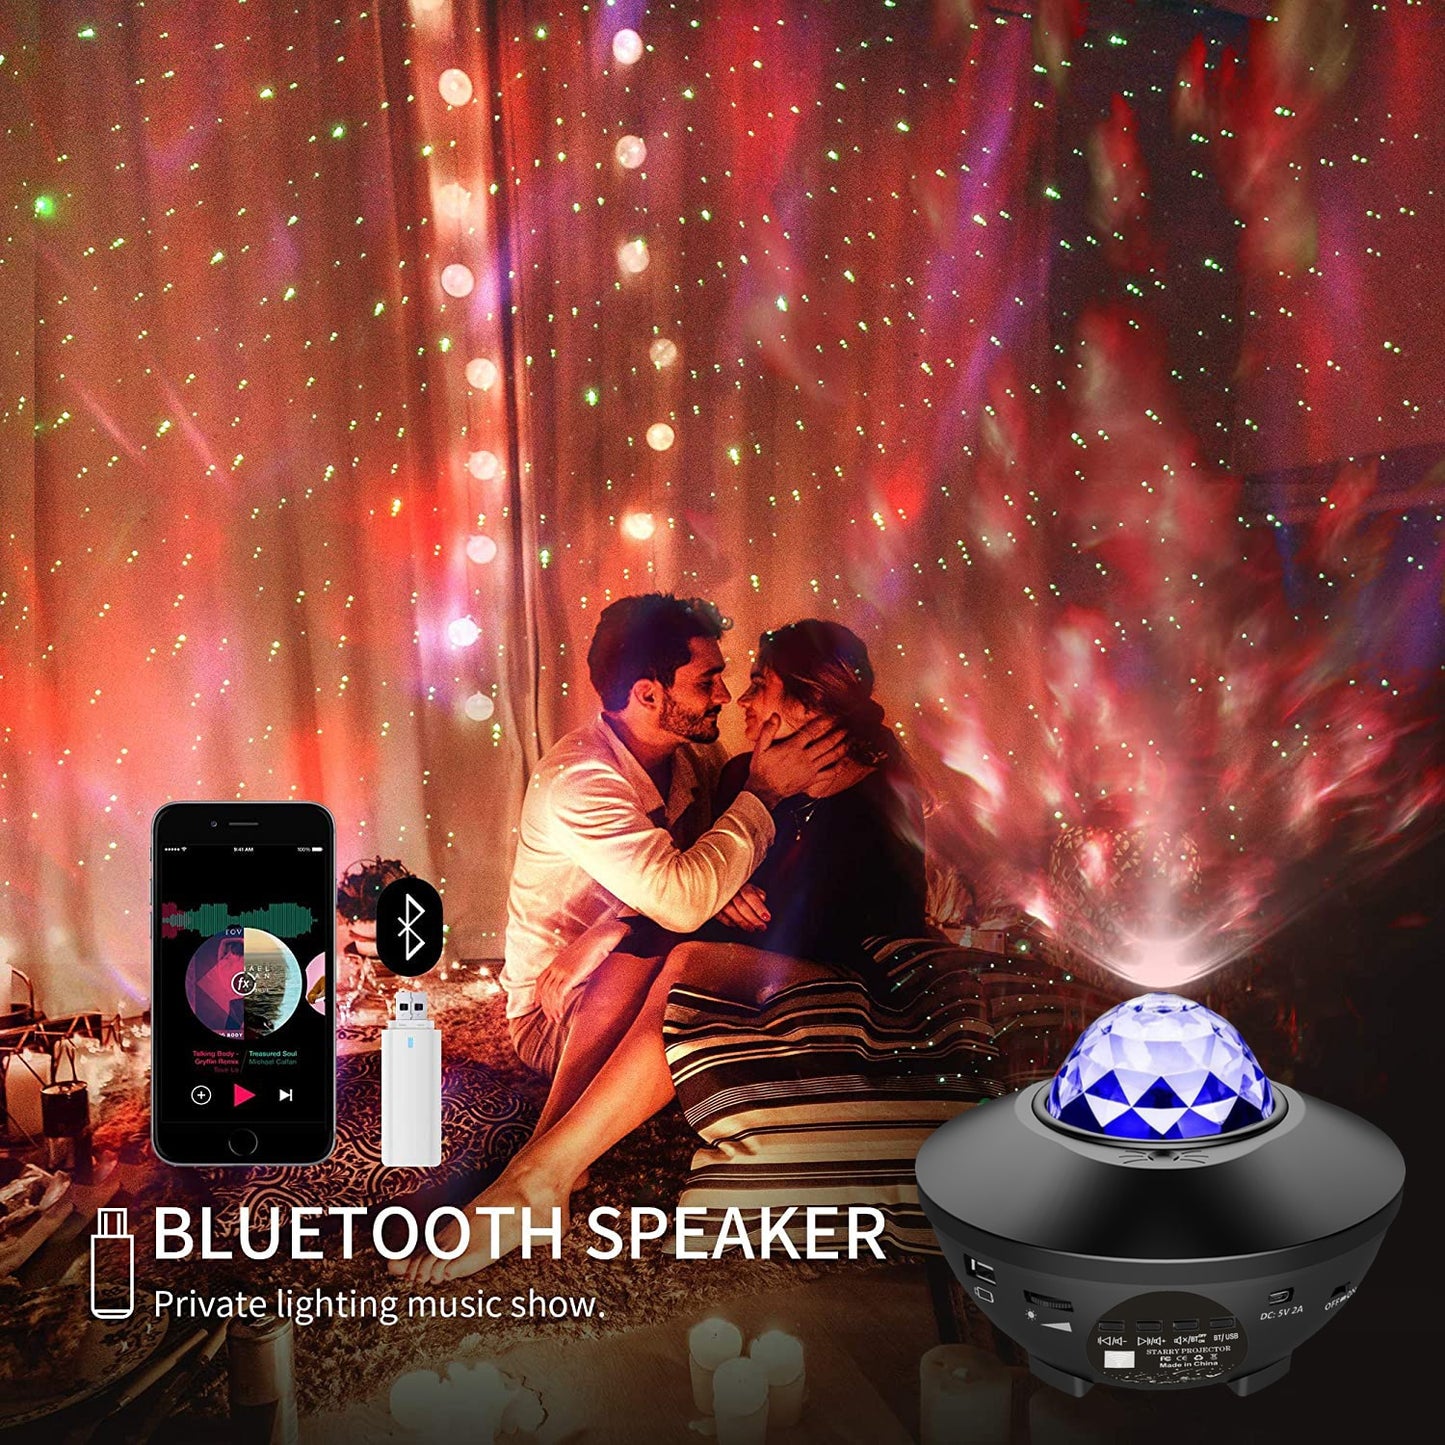 Starry Projector Galaxy Night Light with Ocean Wave Music Speaker Nebula Cloud Ceiling Lamp